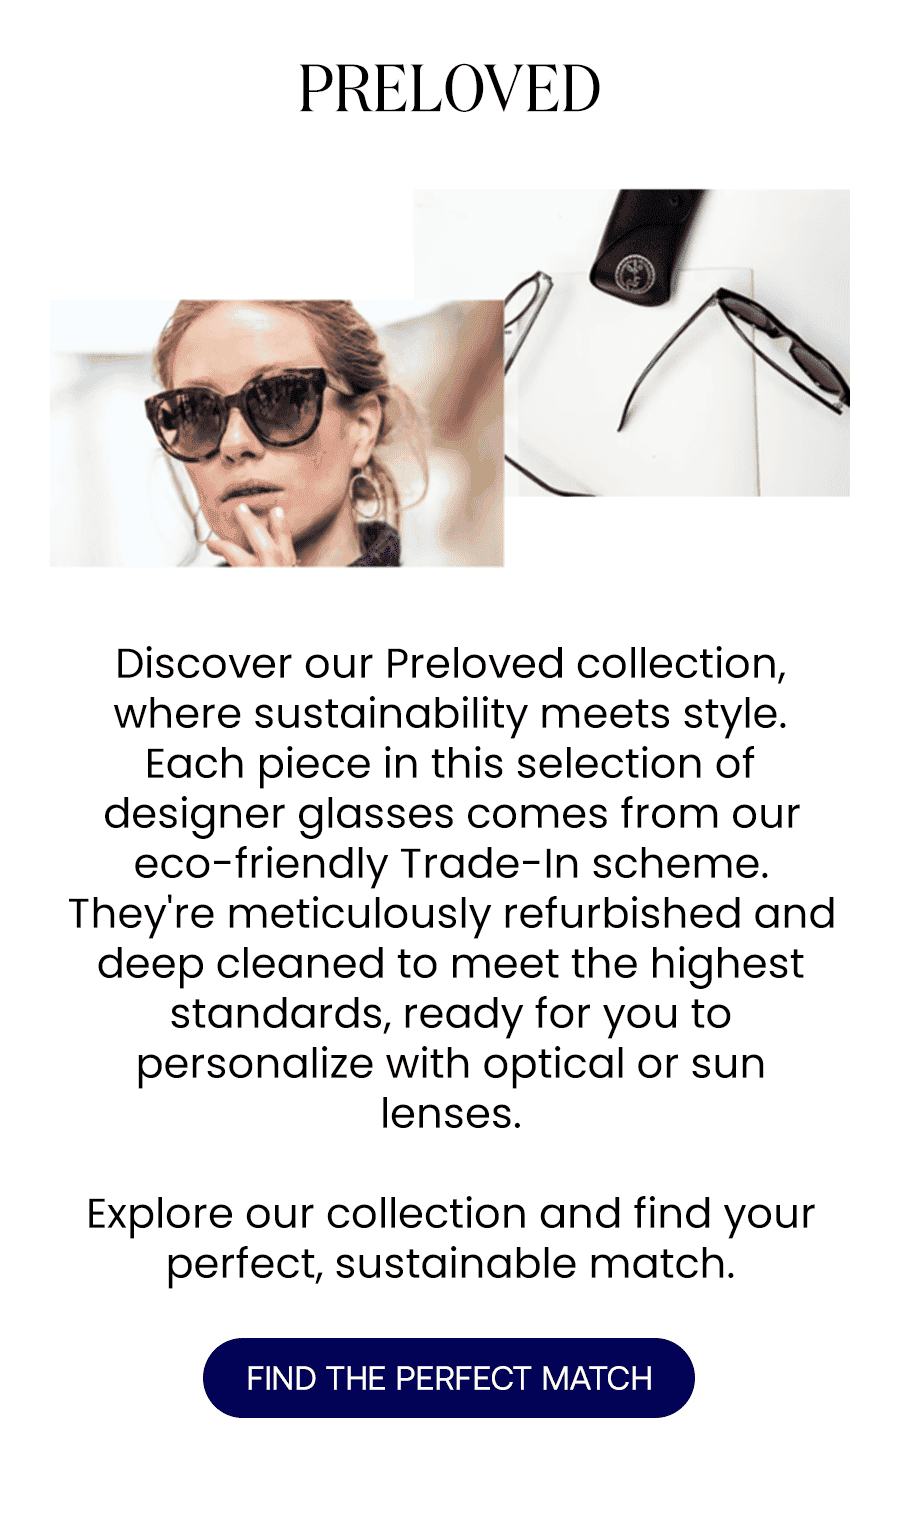 Discover our Preloved collection, where sustainability meets style. Each piece in this selection of designer glasses comes from our eco-friendly Trade-In scheme. They're meticulously refurbished and deep cleaned to meet the highest standards, ready for you to personalize with optical or sun lenses. Explore our collection and find your perfect, sustainable match. FIND THE PERFECT MATCH